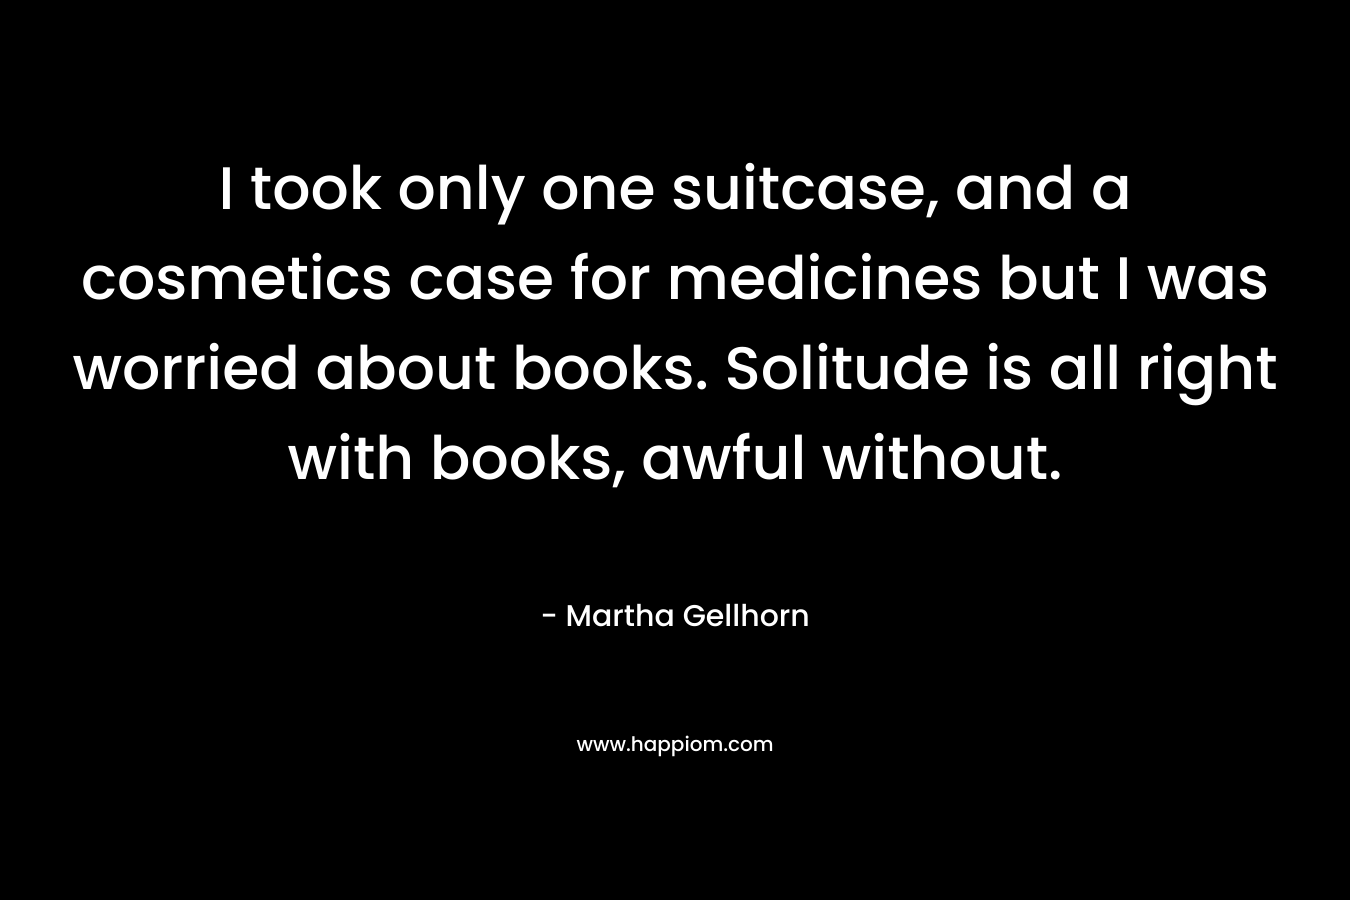 I took only one suitcase, and a cosmetics case for medicines but I was worried about books. Solitude is all right with books, awful without.